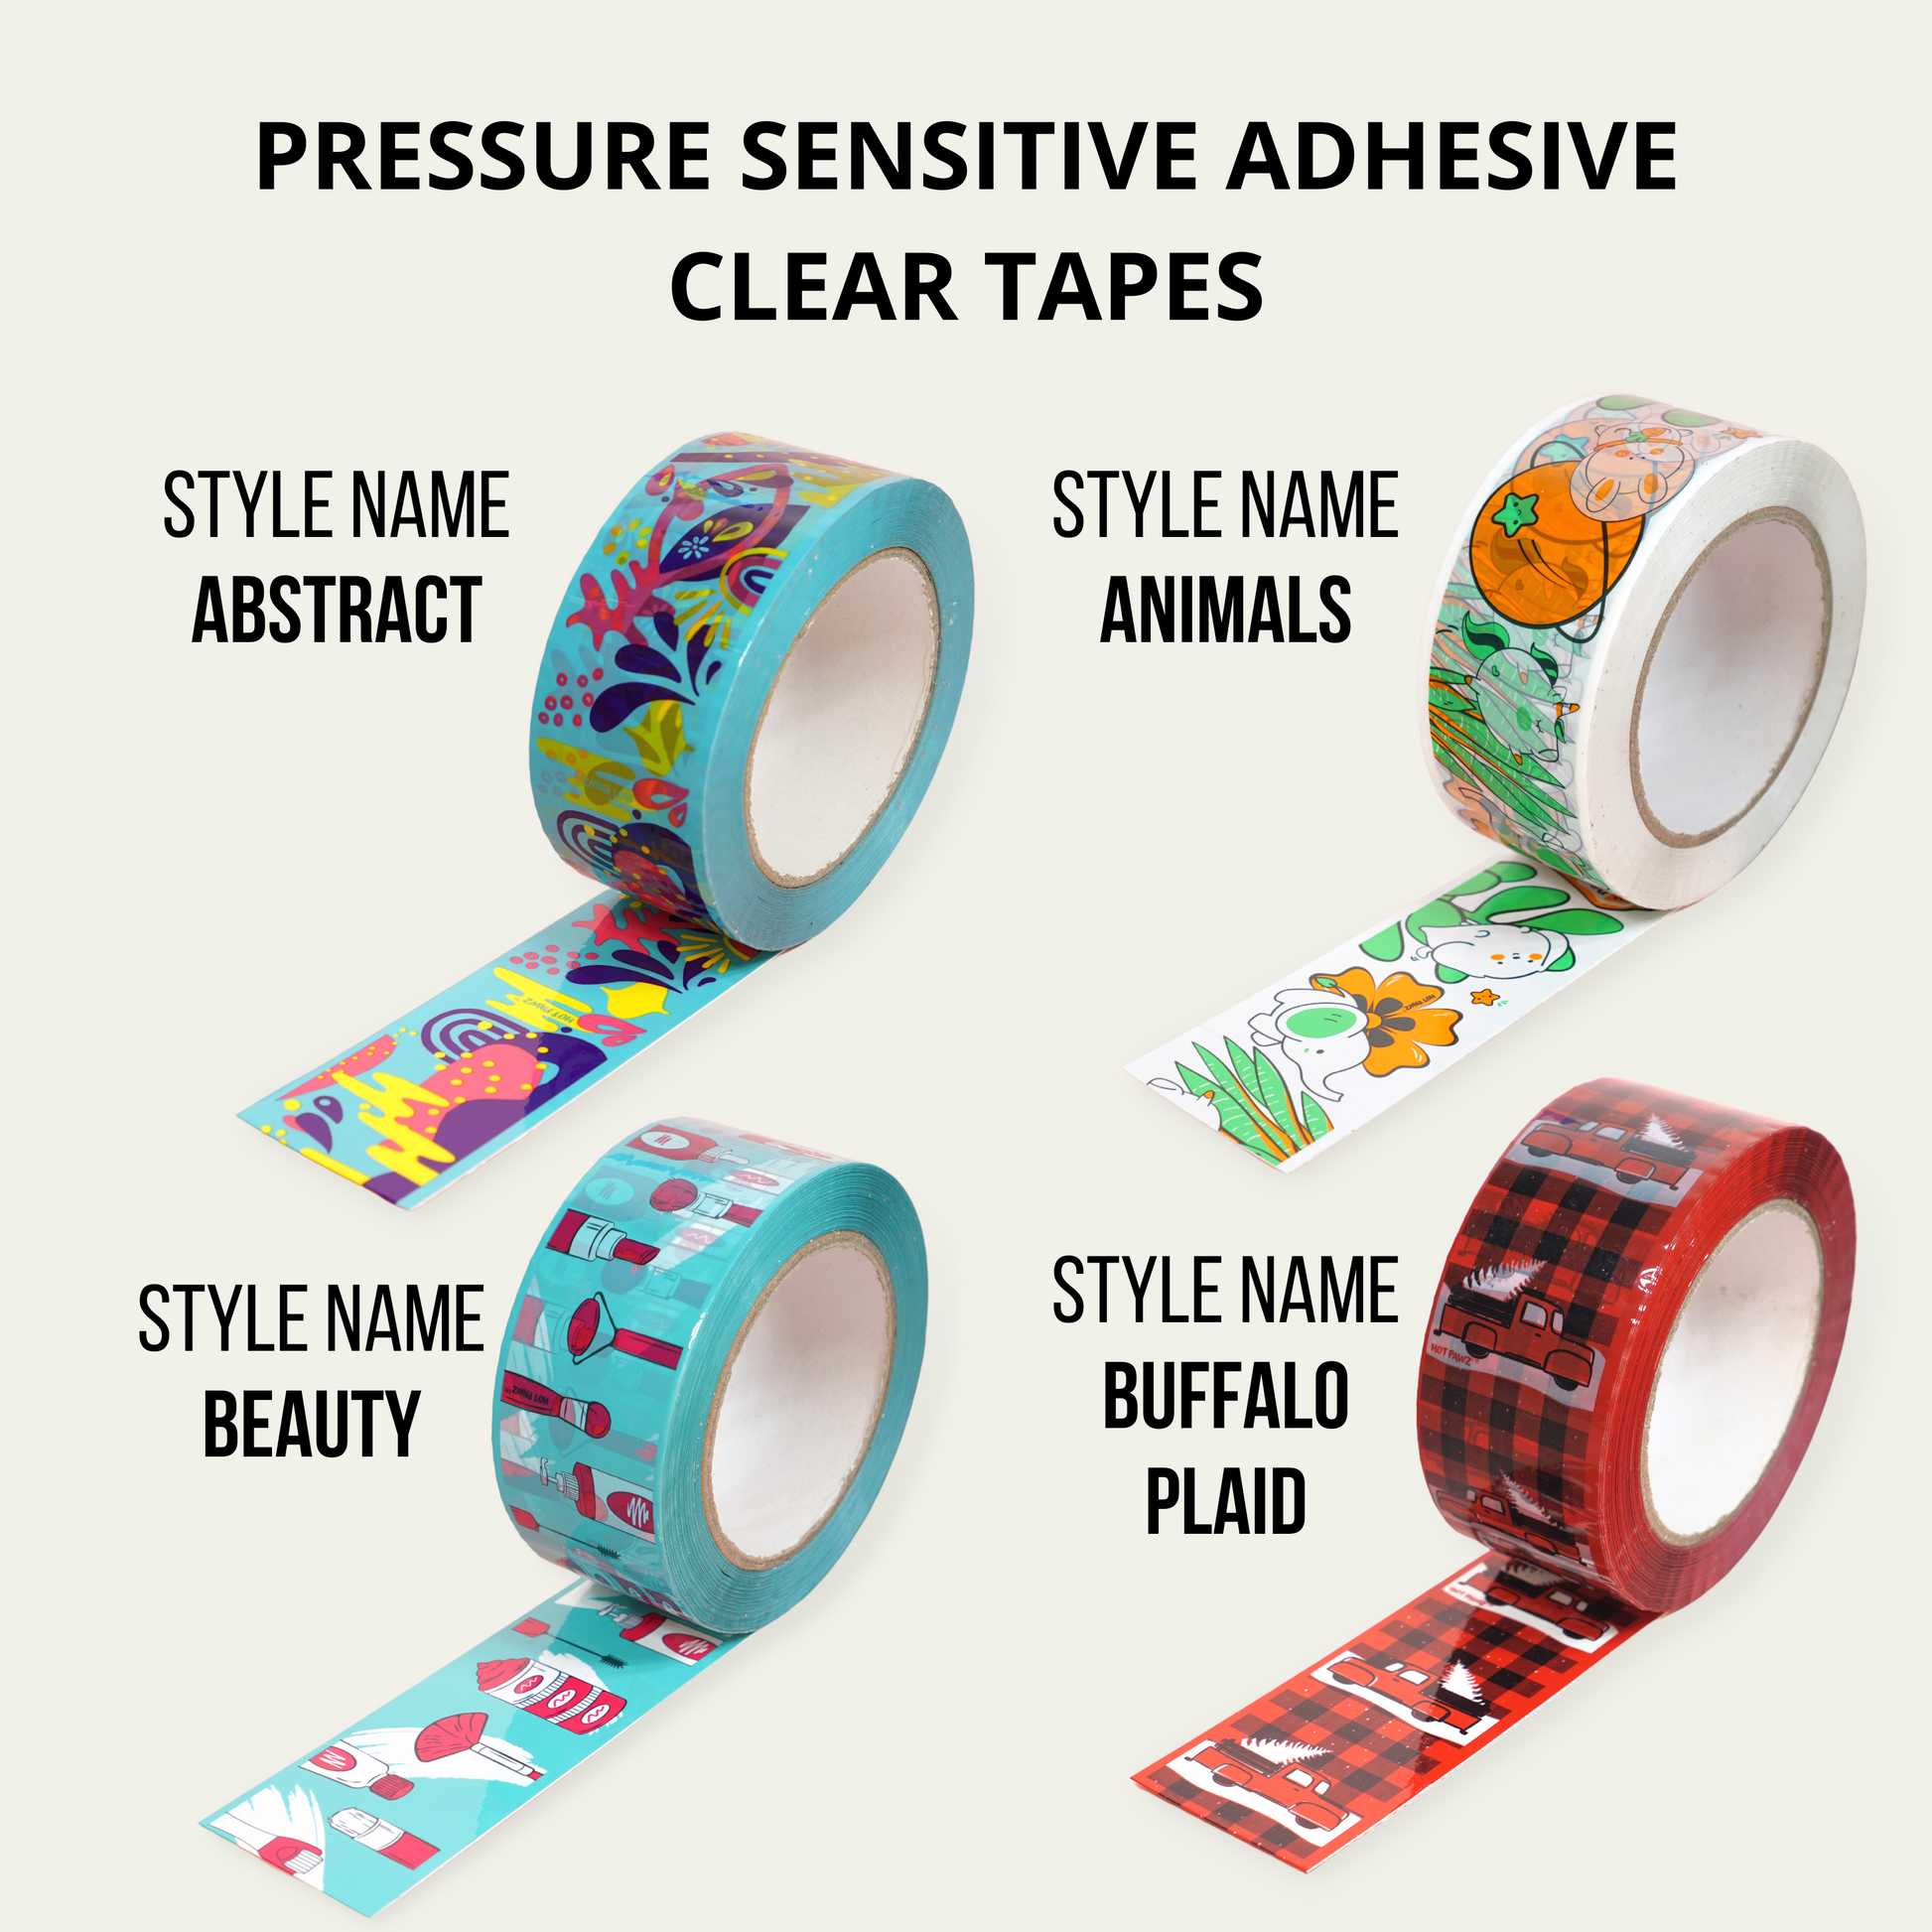 How Wide Is Packing Tape? – Hot Pawz Packaging Tapes